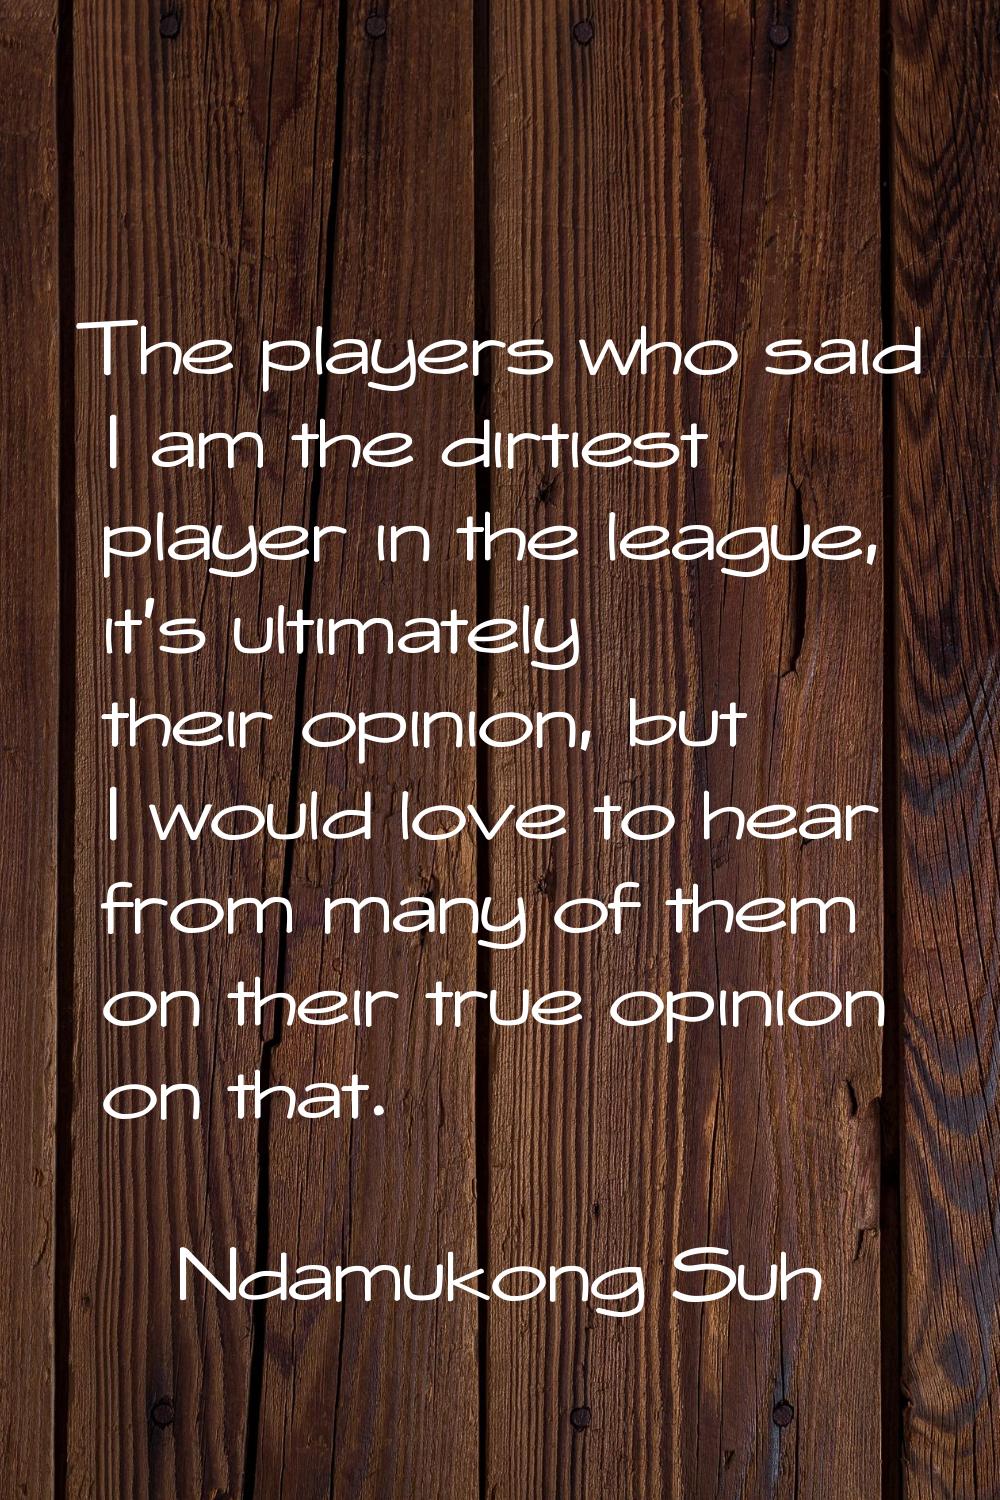 The players who said I am the dirtiest player in the league, it's ultimately their opinion, but I w